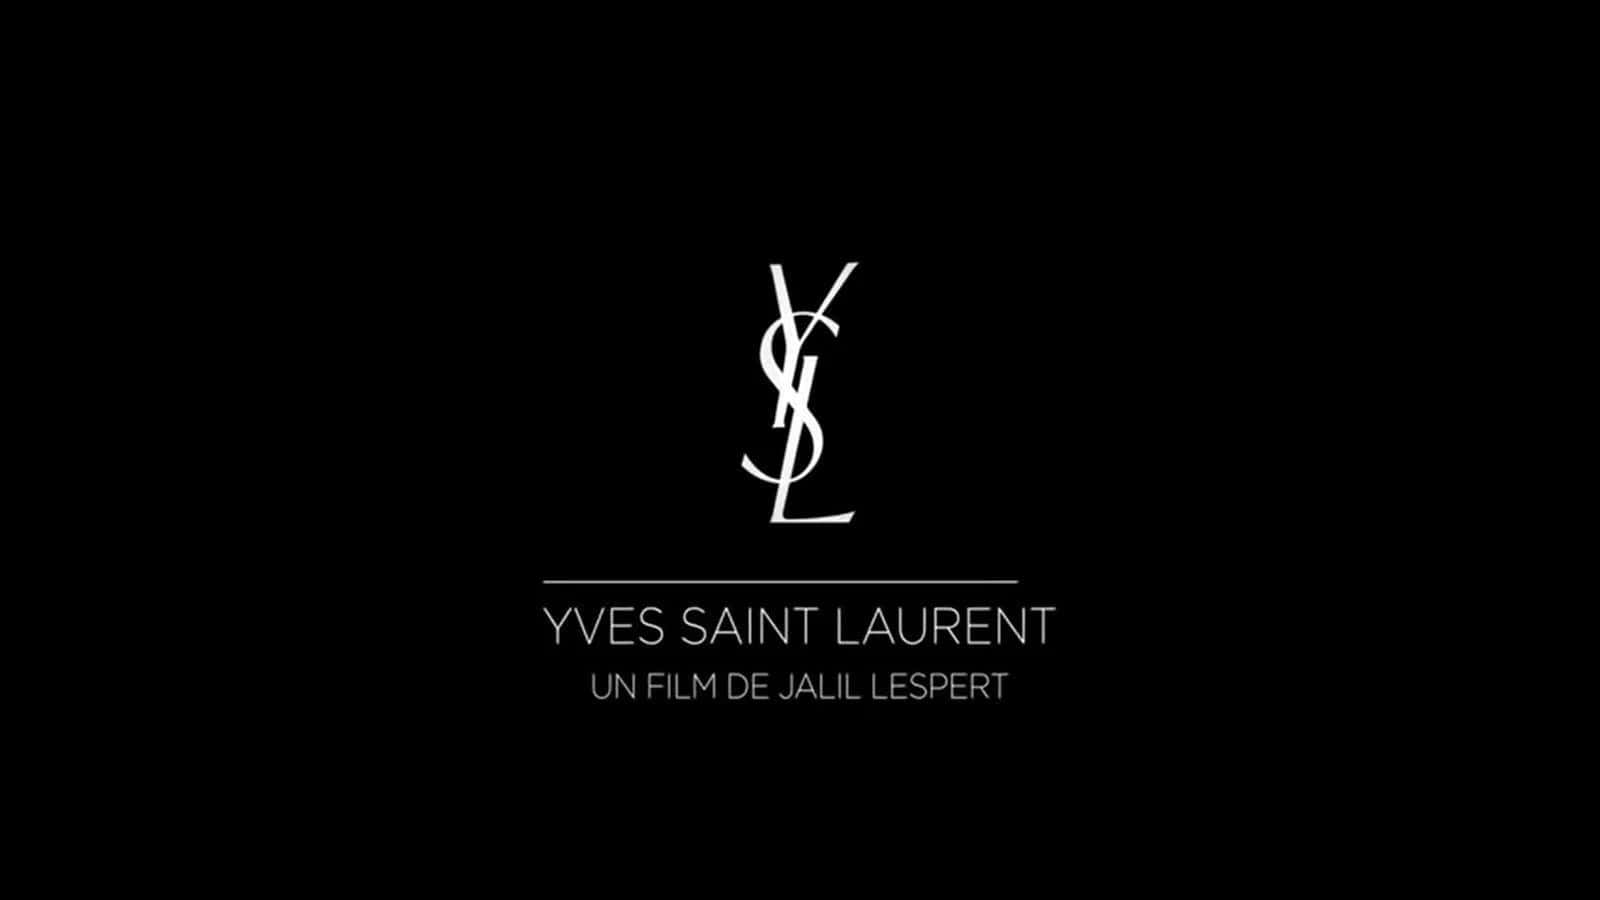 Look gorgeous with Ysl